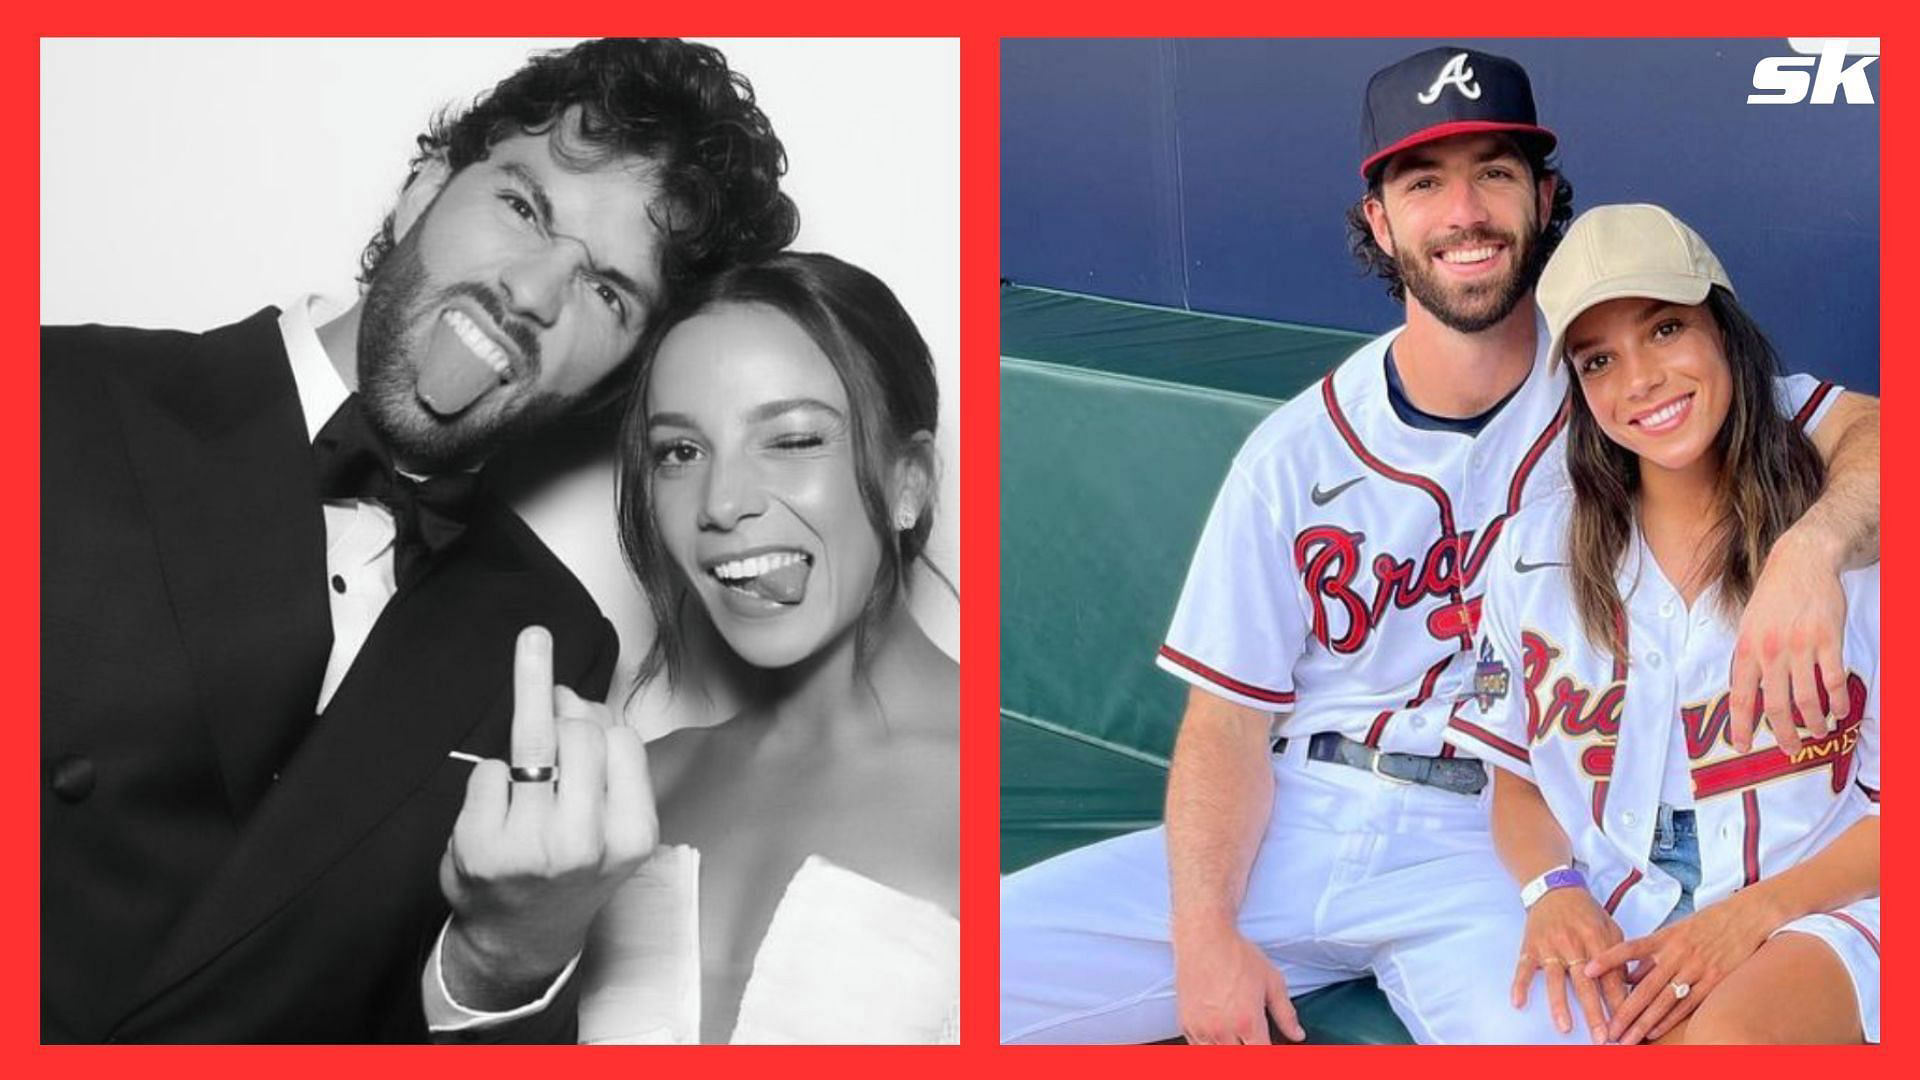 Fans troll Dansby Swanson's wife, Mallory Pugh, for her somber expression  in a Gatorade commercial: The face says it all